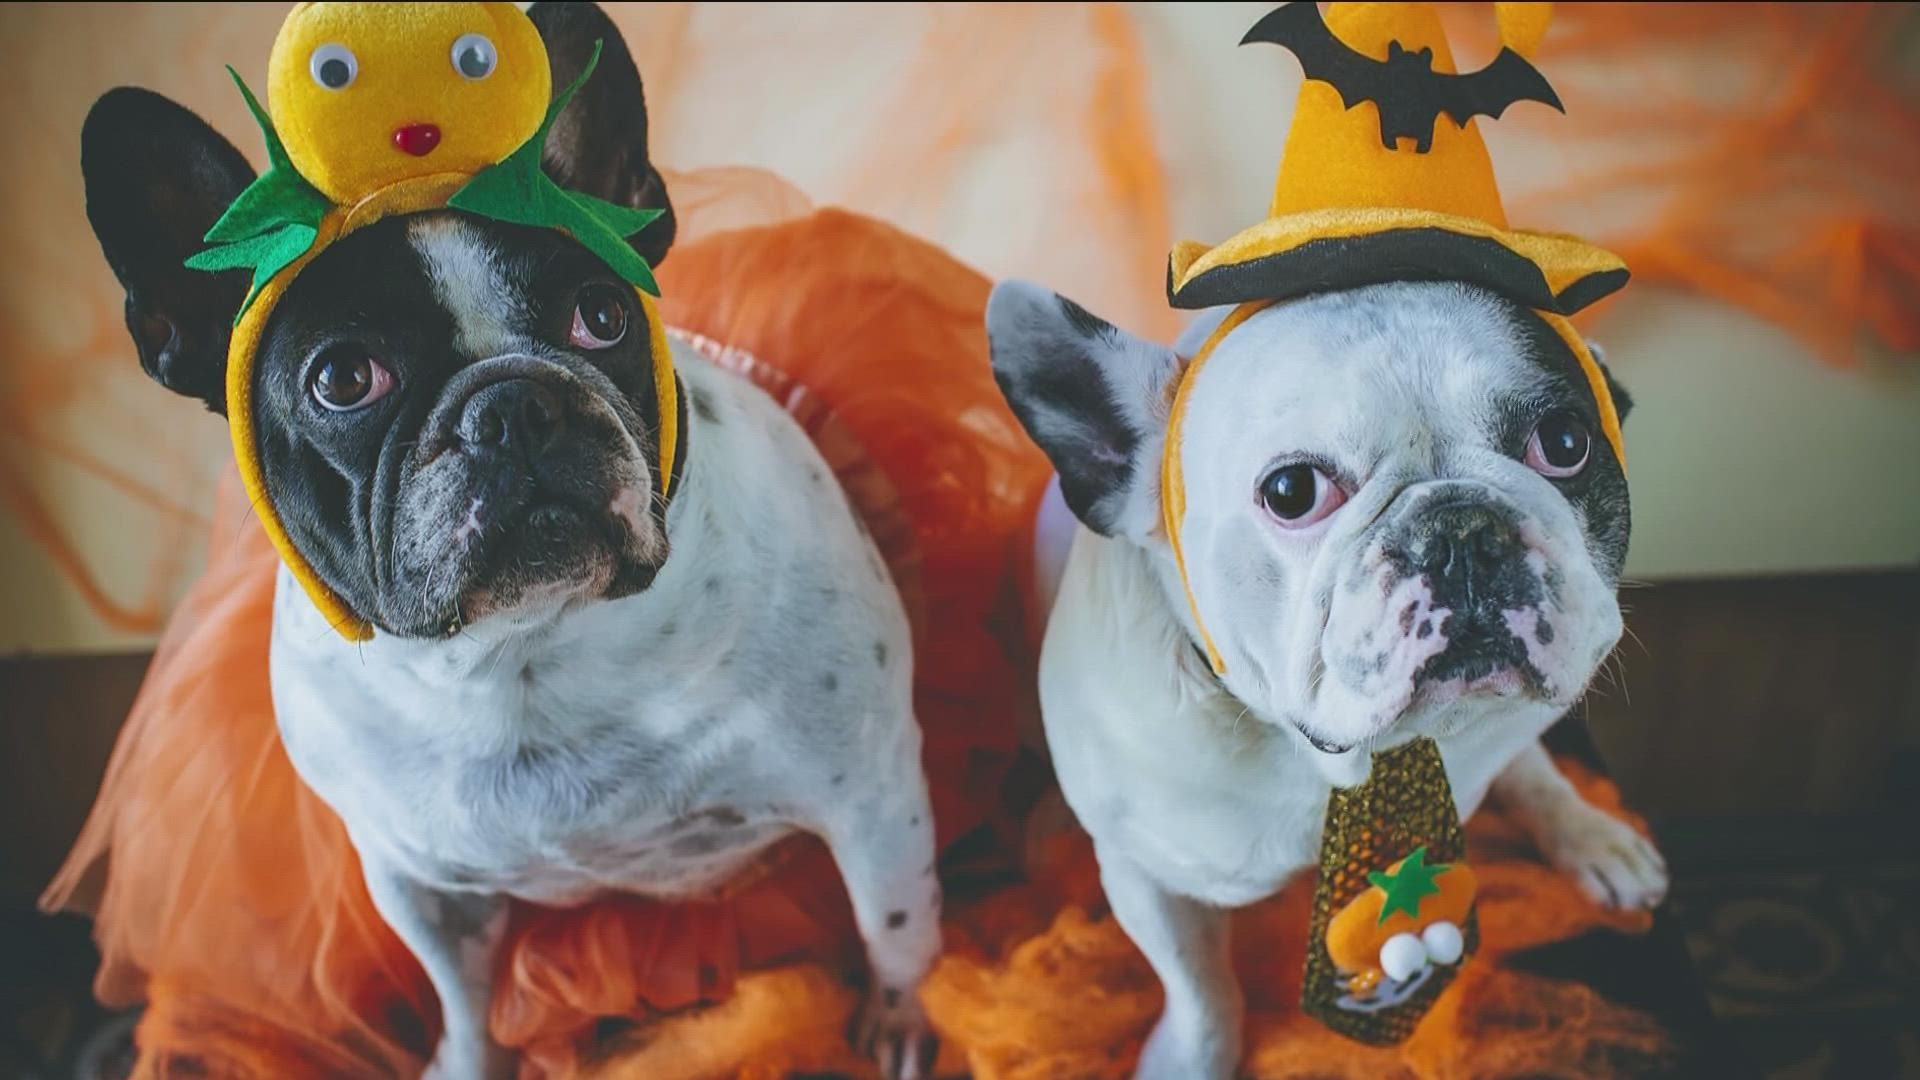 Halloween for pets can be a dangerous environment.